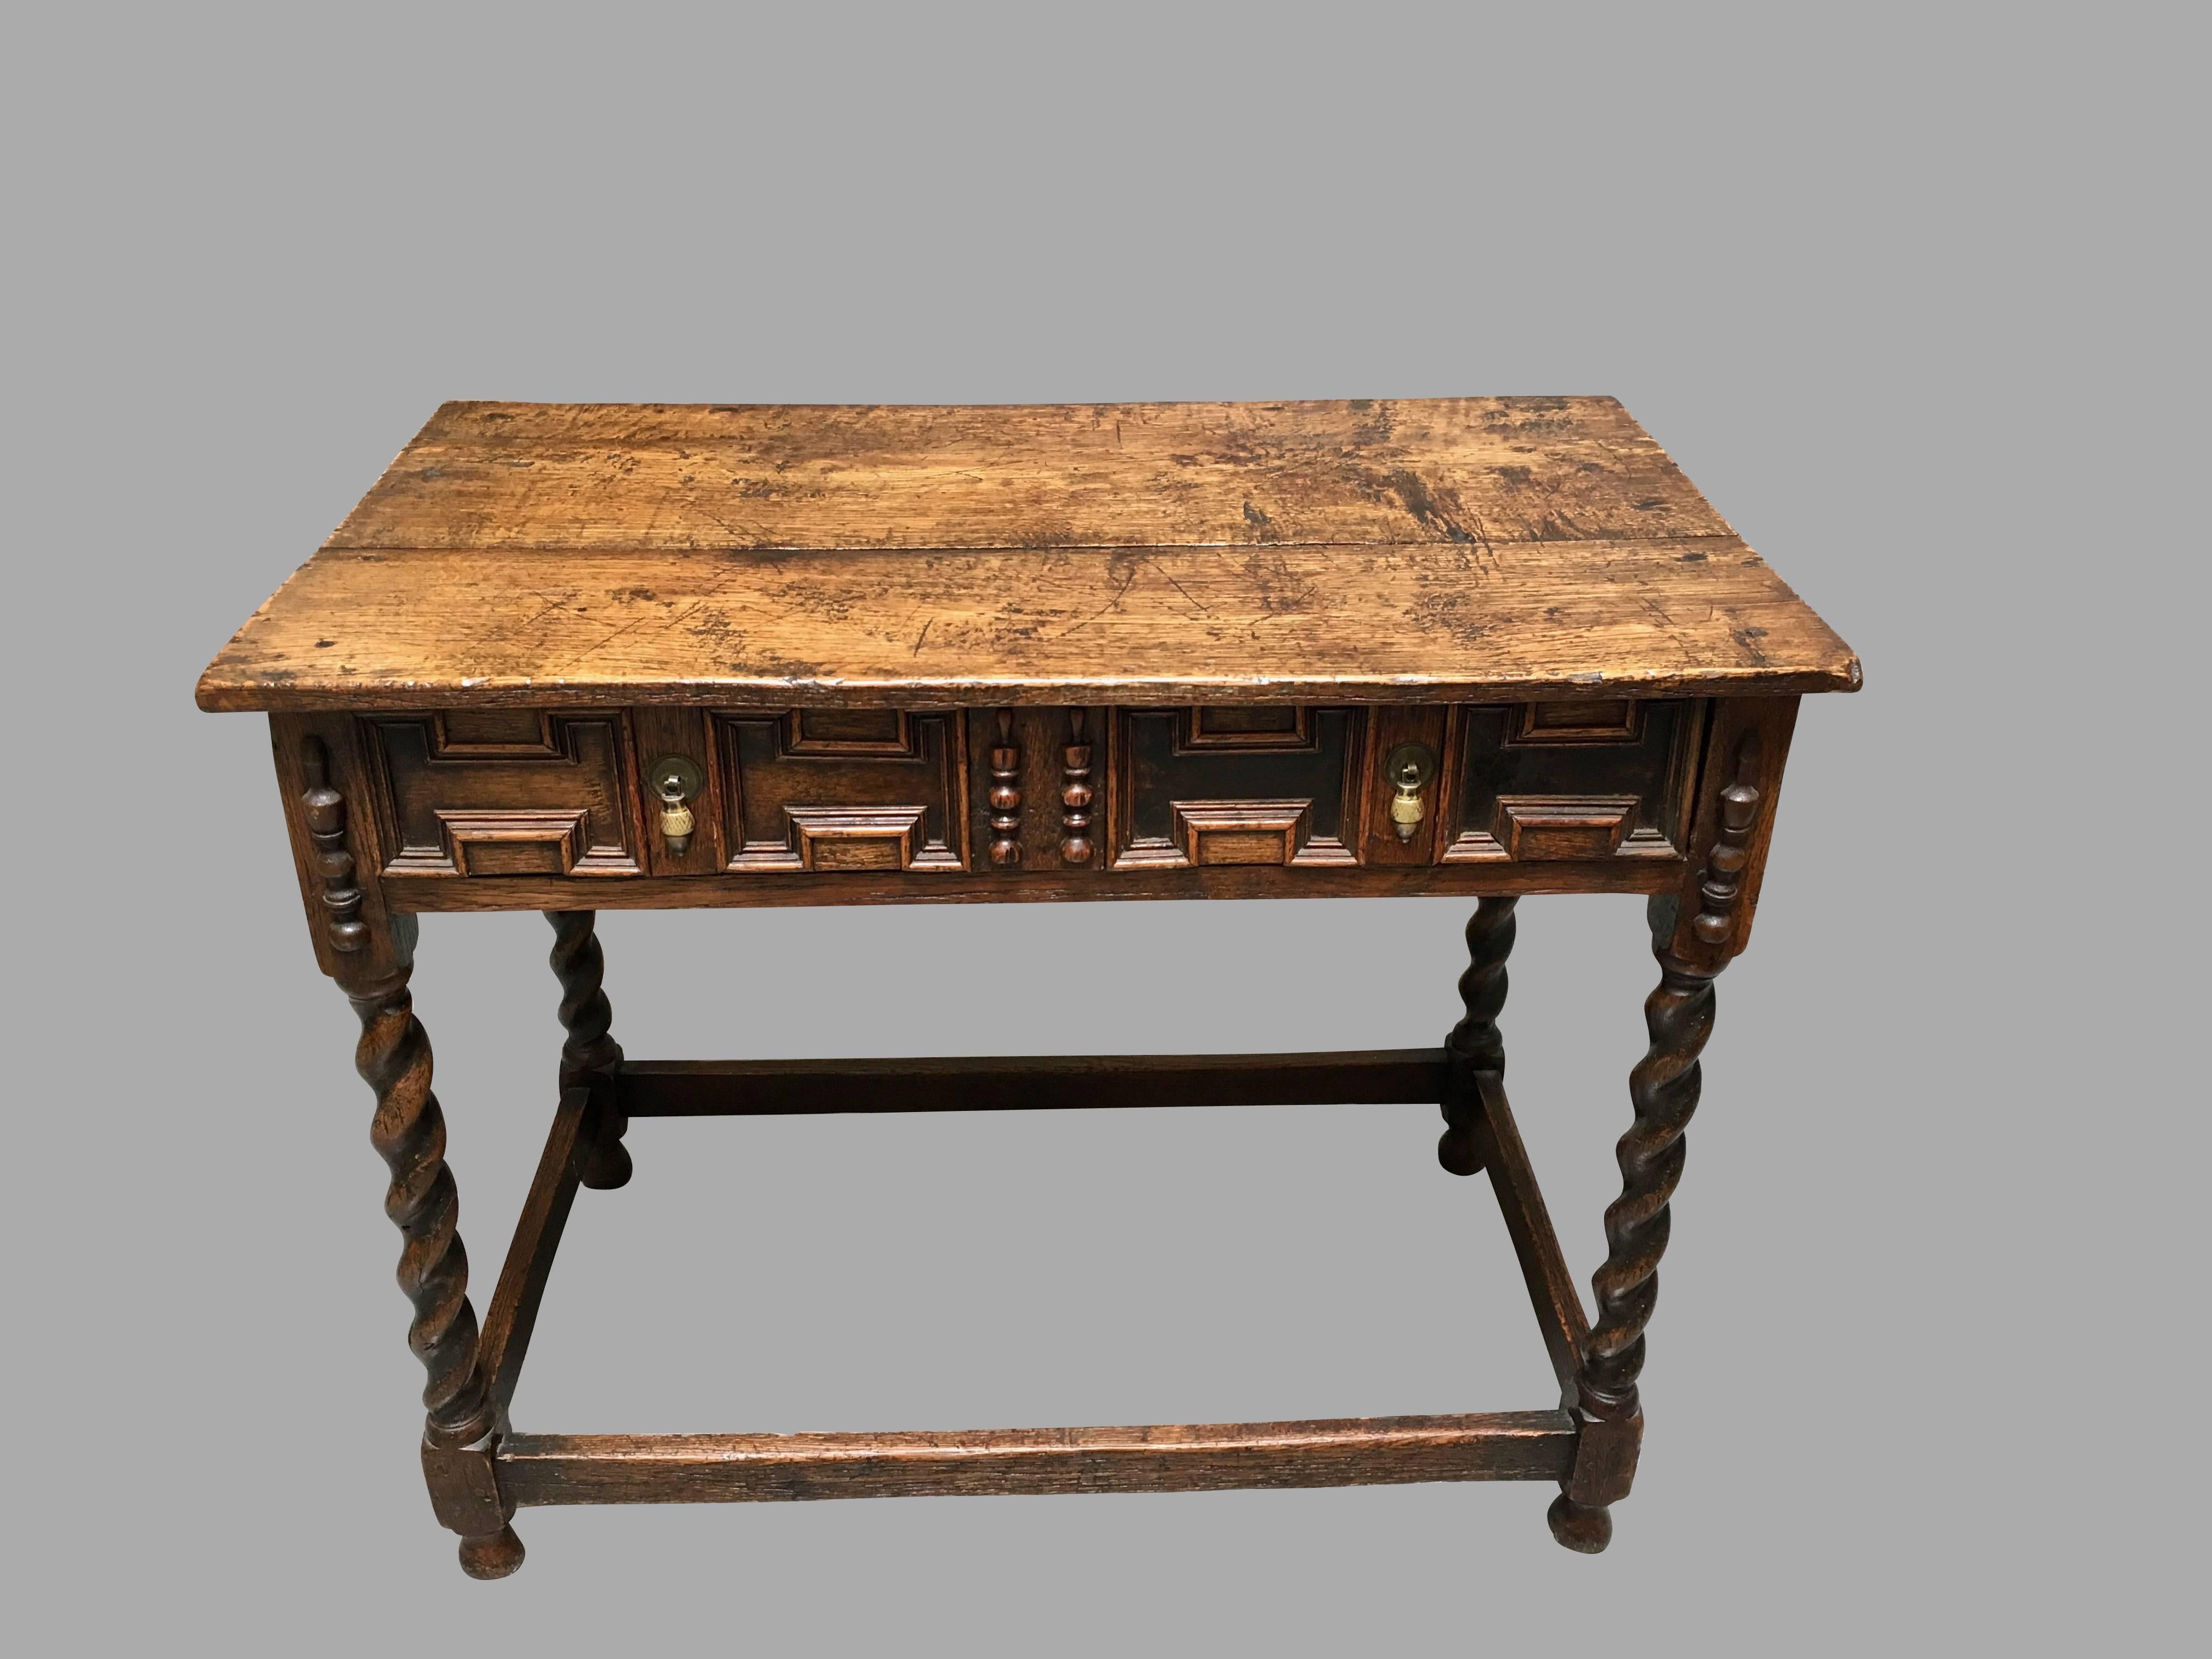 A James II period oak side table, the overhanging top above a long frieze drawer with panelled decoration, supported on barley twist legs joined by a box stretcher ending in bulb feet, circa 1680.